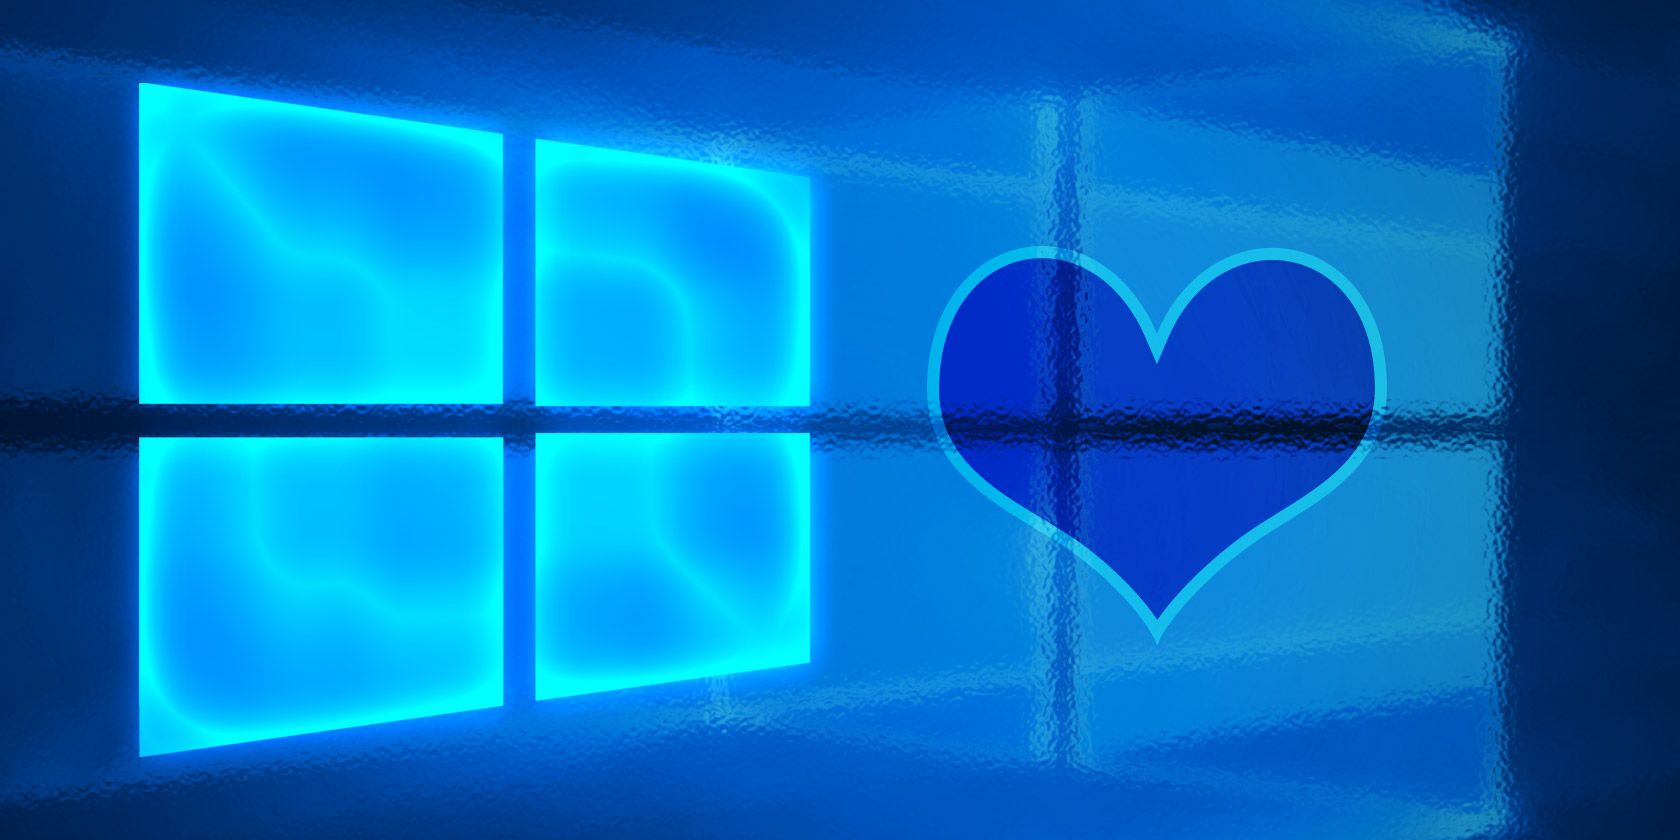 9 Windows 10 Anniversary Update Features You'll Love